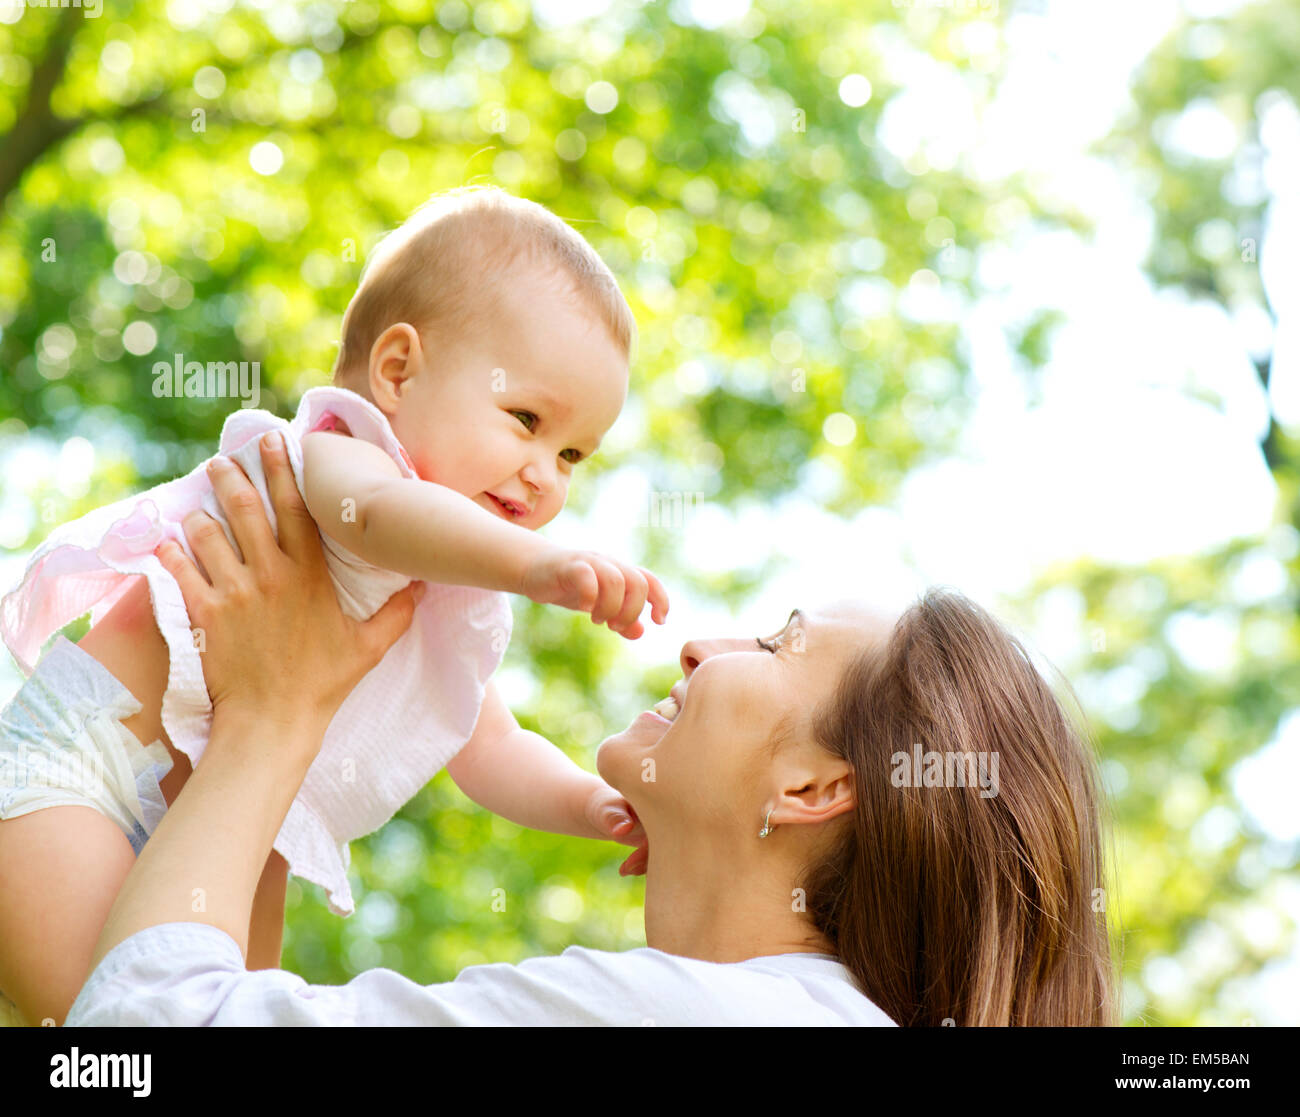 Beautiful Mother And Baby outdoors. Nature Stock Photo - Alamy